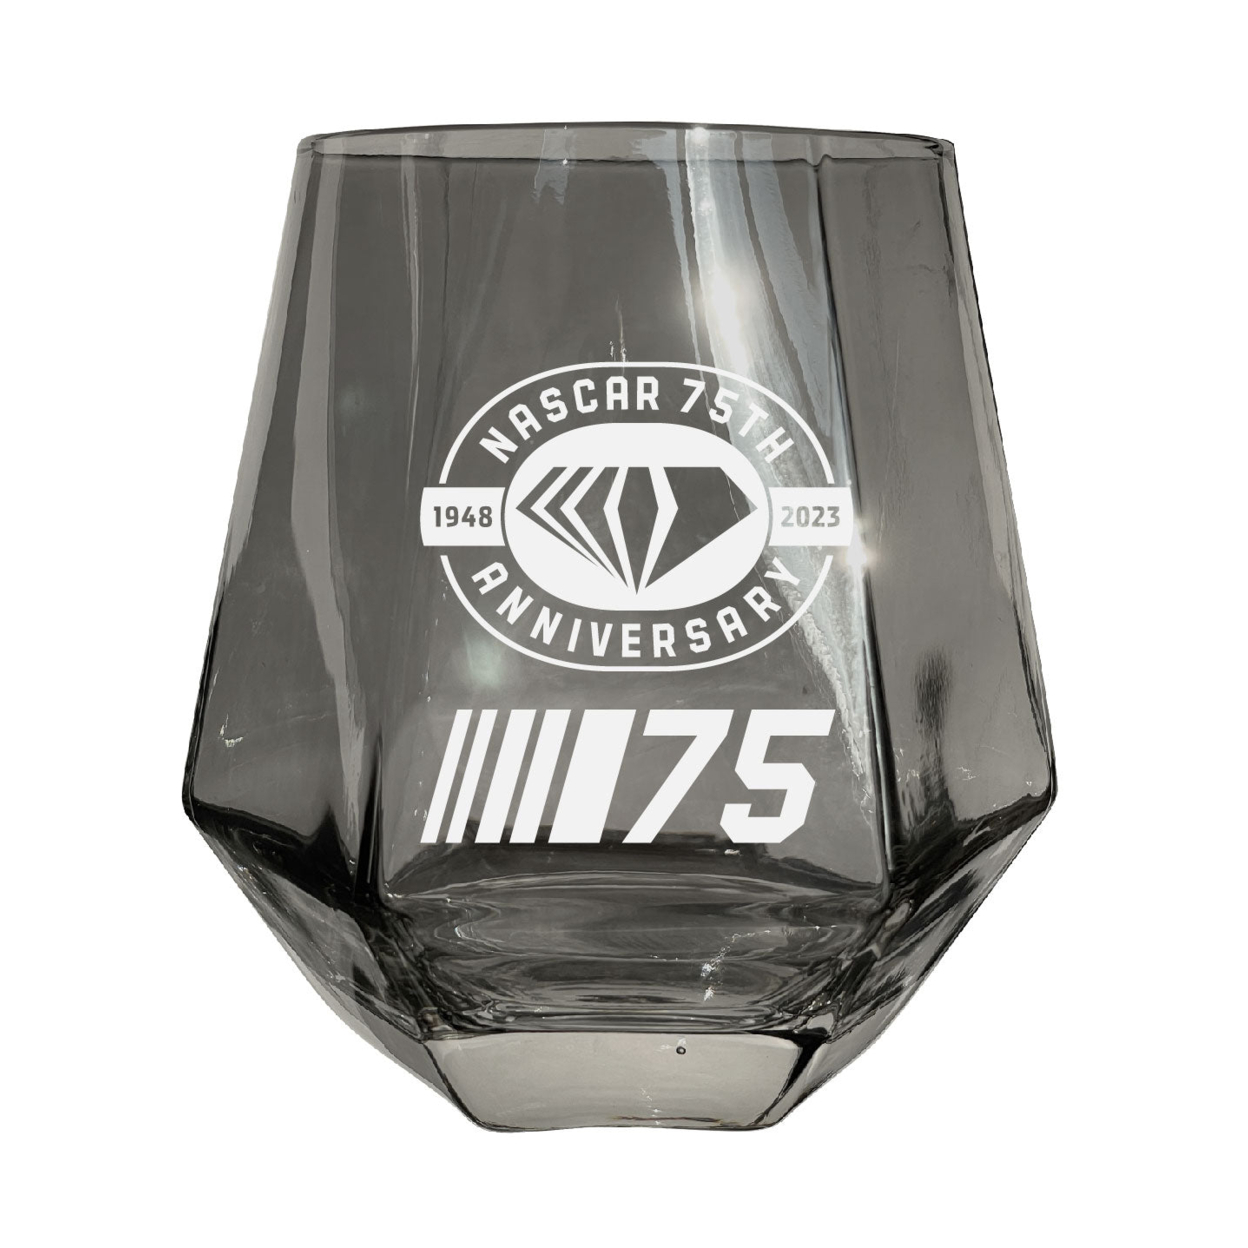 NASCAR 75 Year Anniversary Officially Licensed 10 Oz Engraved Diamond Glass - Clear, Single